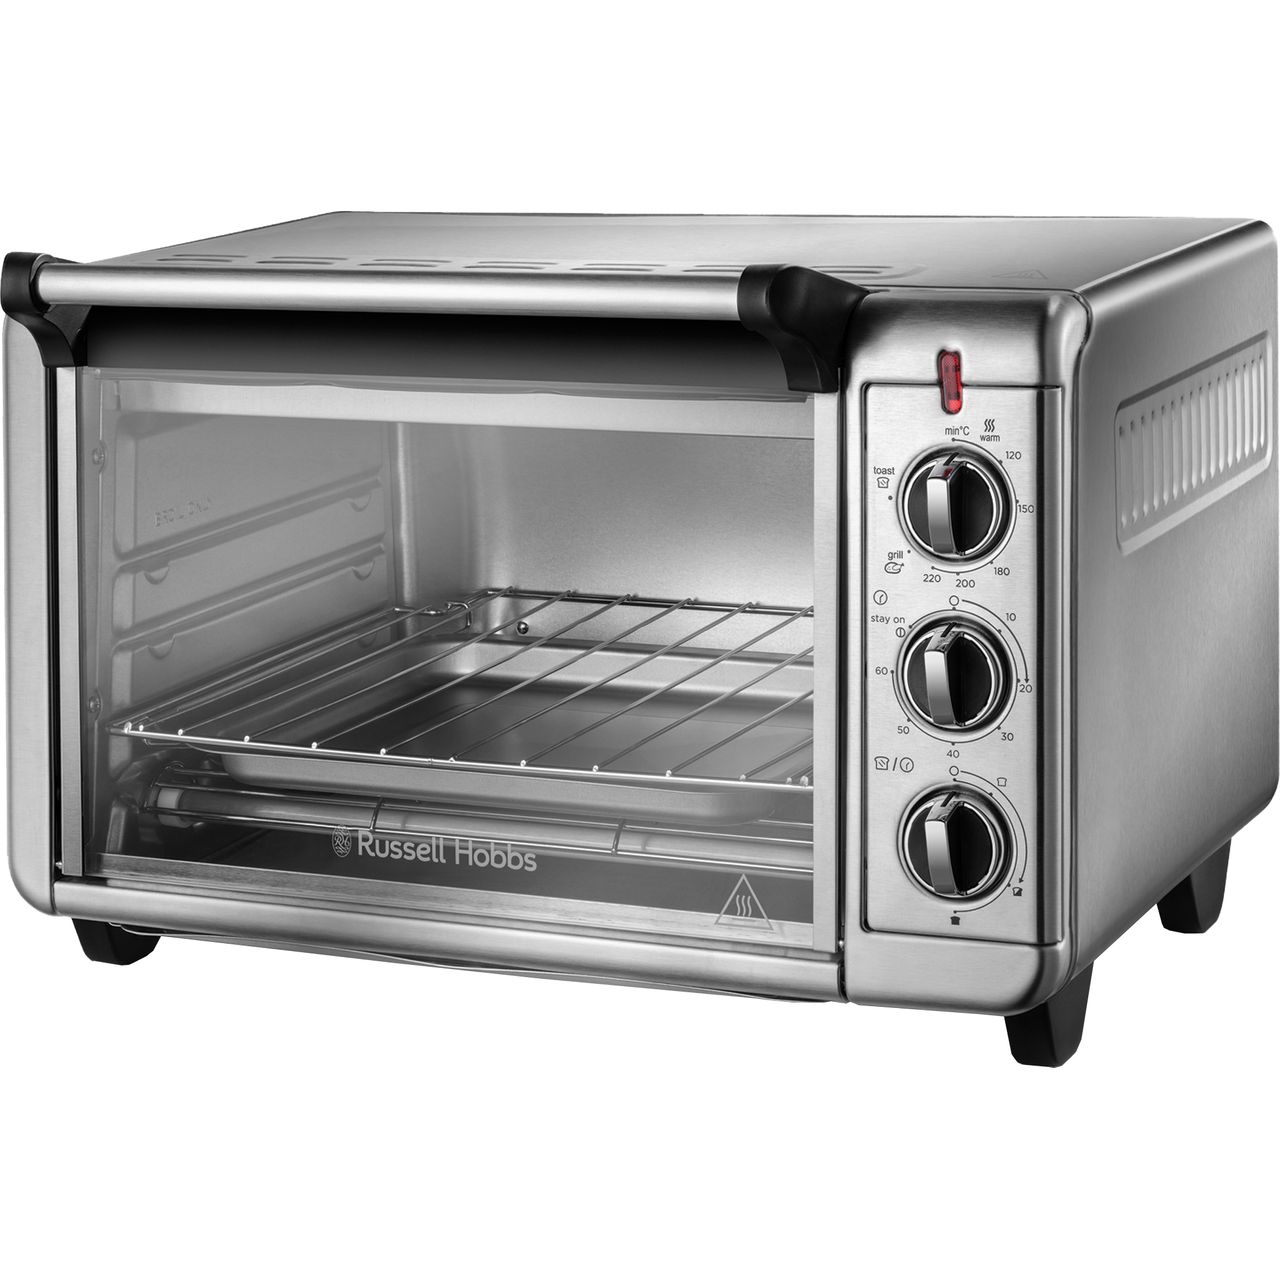 Russell Hobbs Express 26090 Mini Oven Review